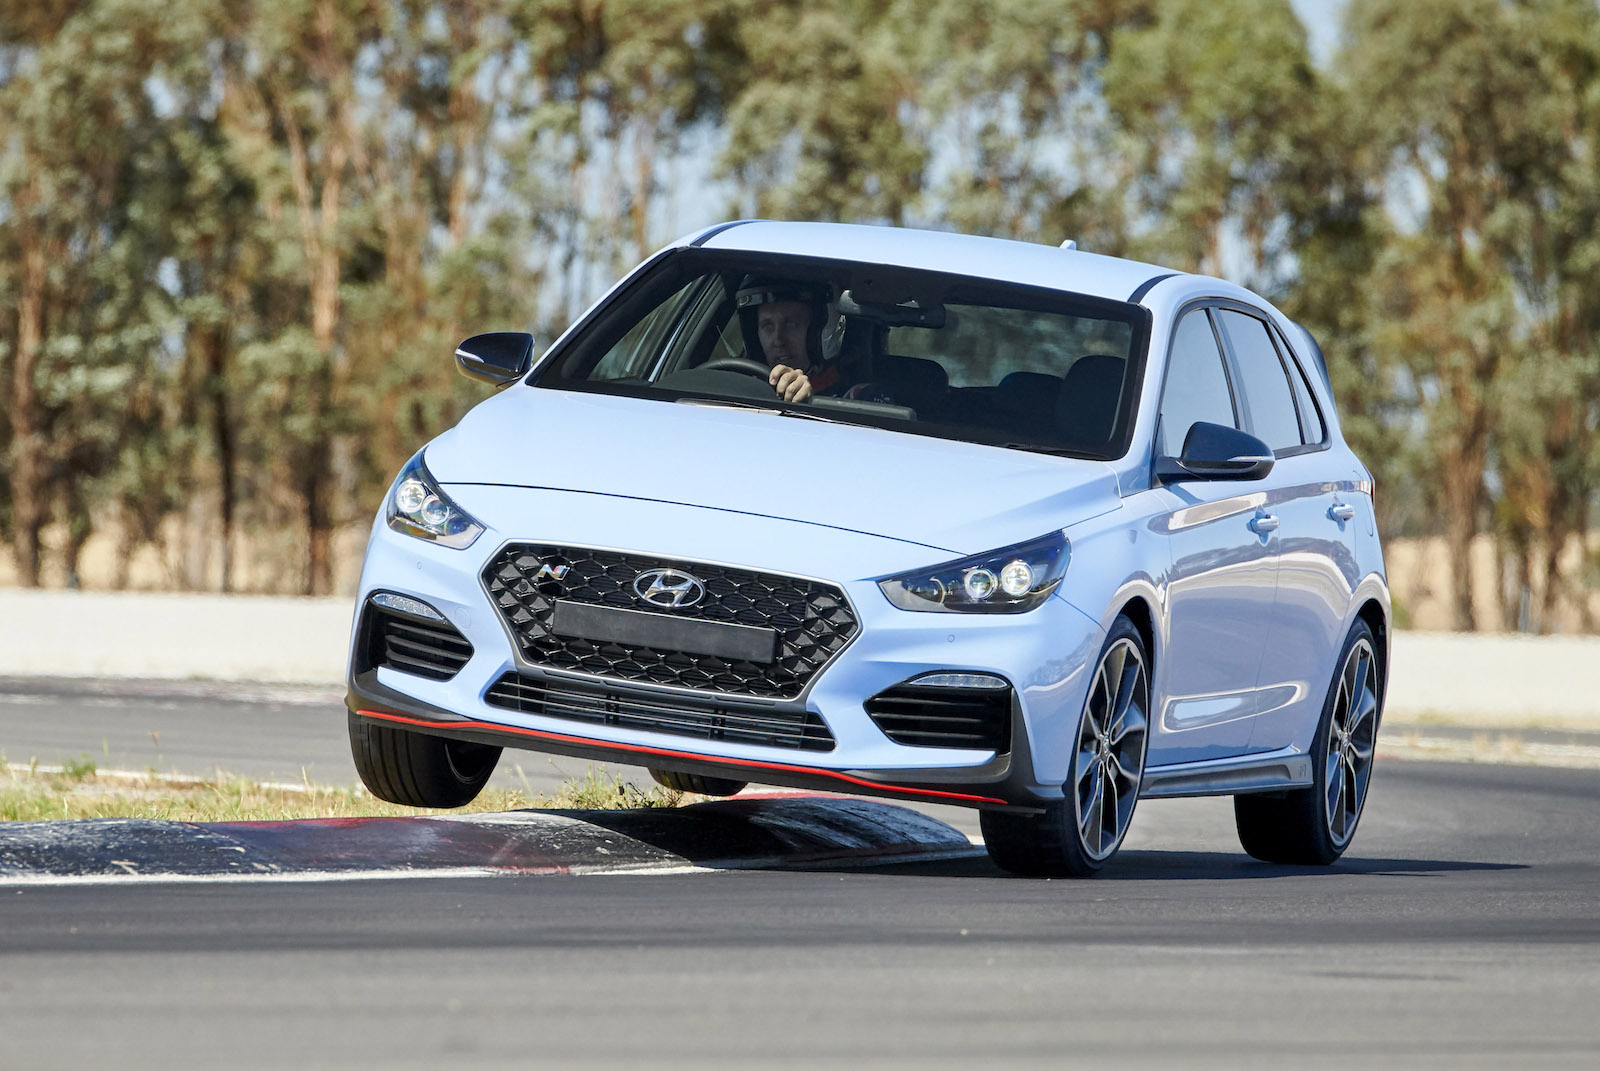 Hyundai i30 N warranty covers track use, on sale in April